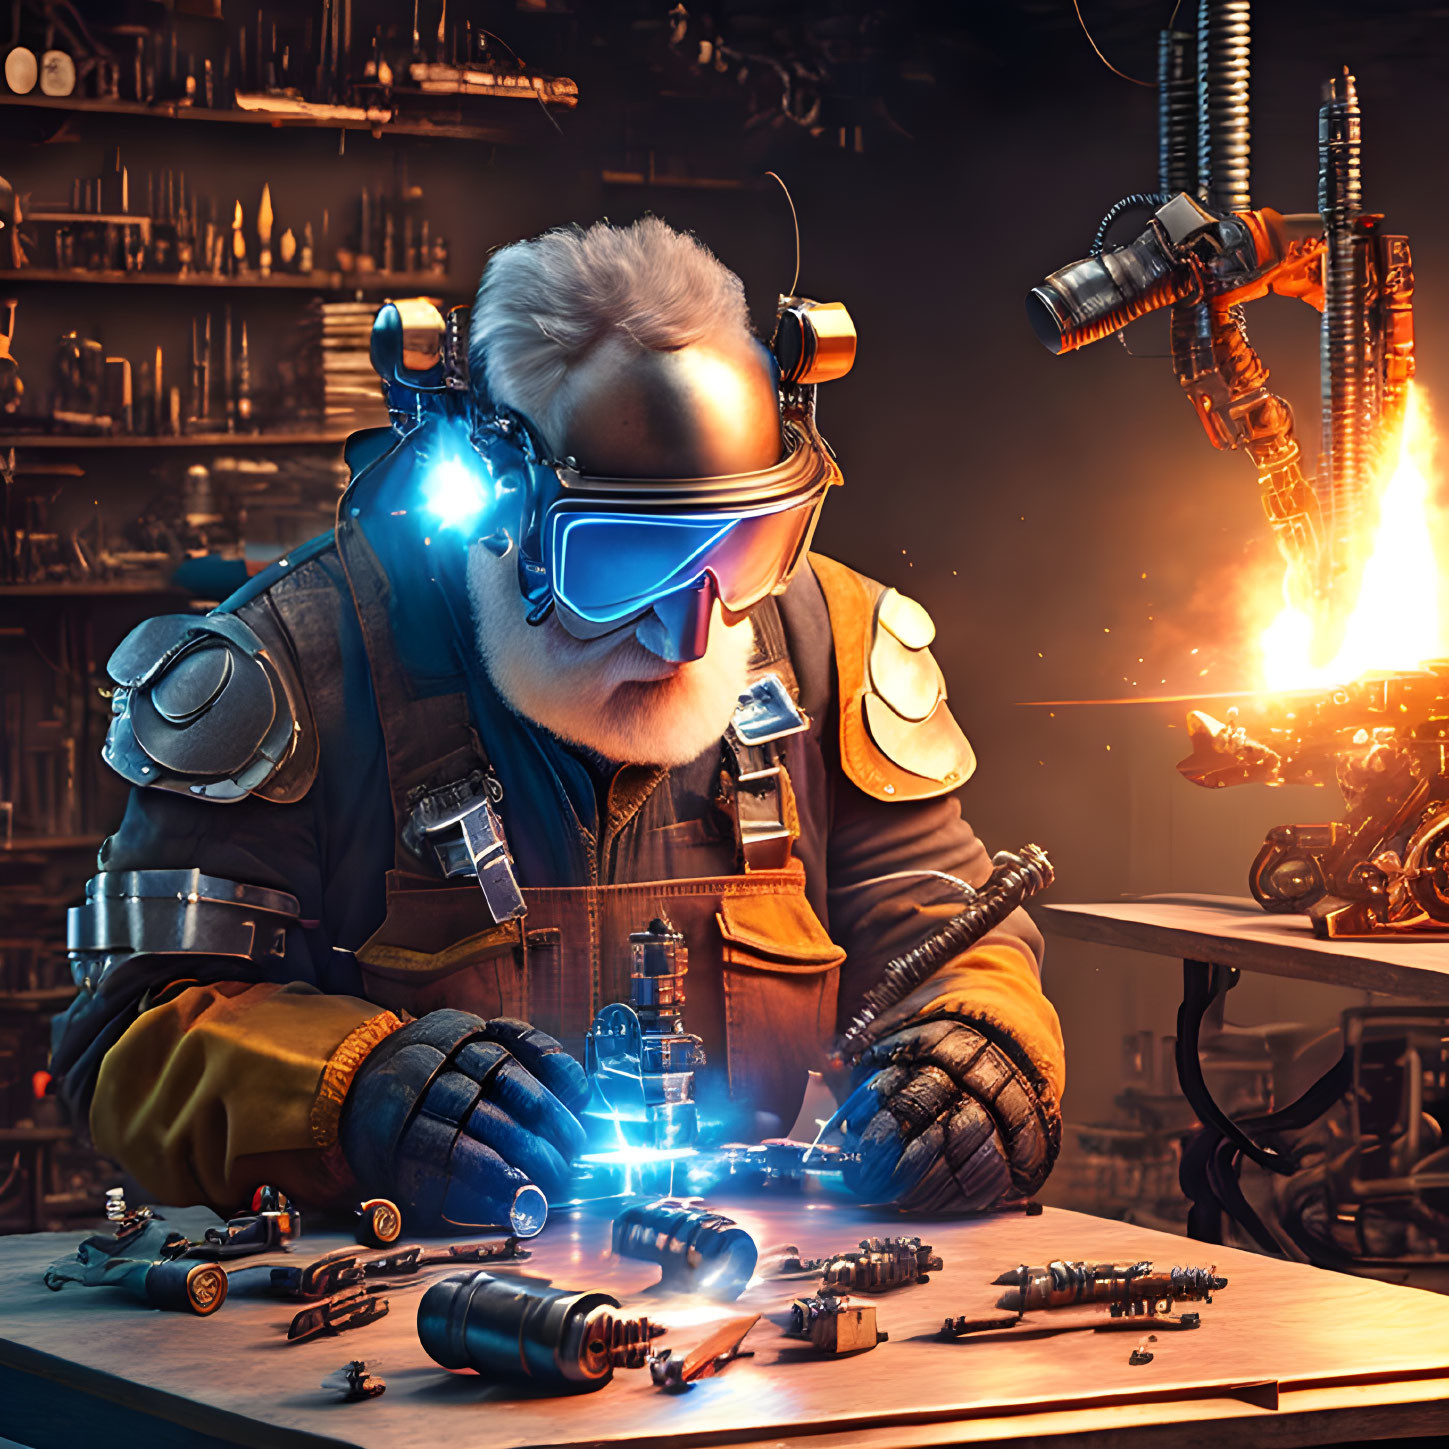 Elderly craftsman welding at futuristic workbench surrounded by industrial tech